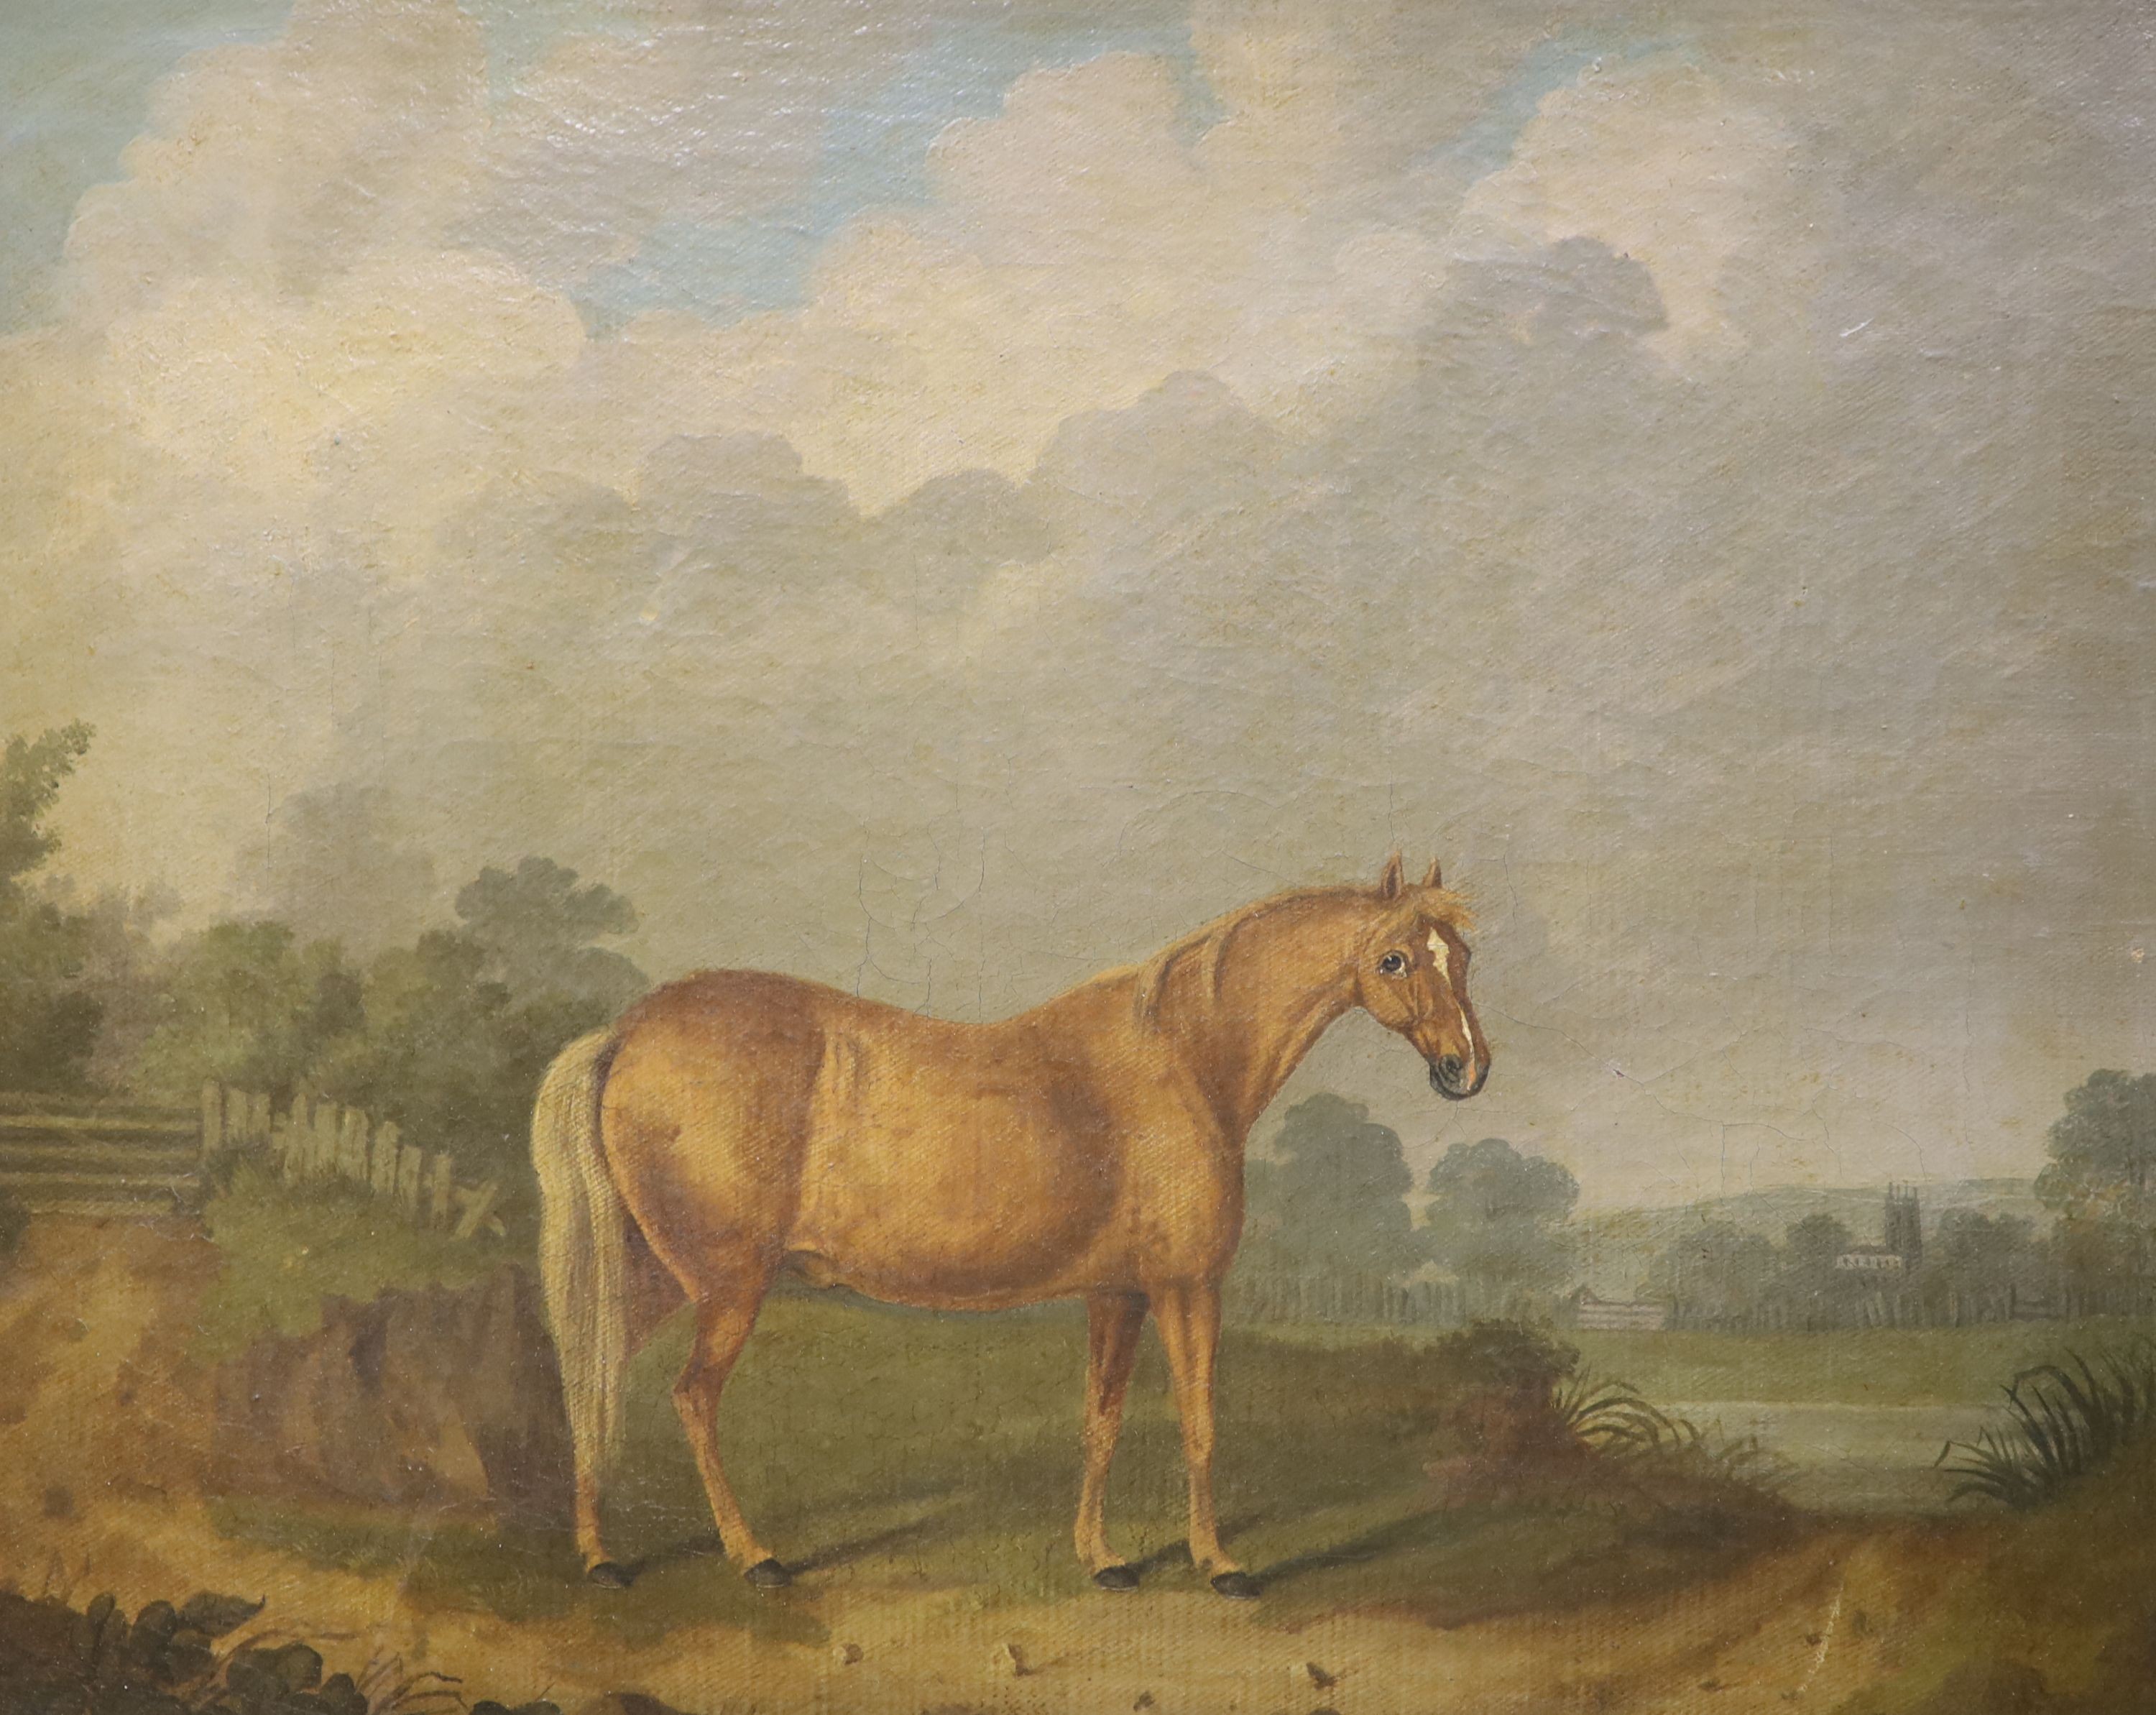 Capt. Johnson (C.19th), oil on canvas, Portrait of a horse standing in a landscape, signed and dated 1822, 34 x 43cm